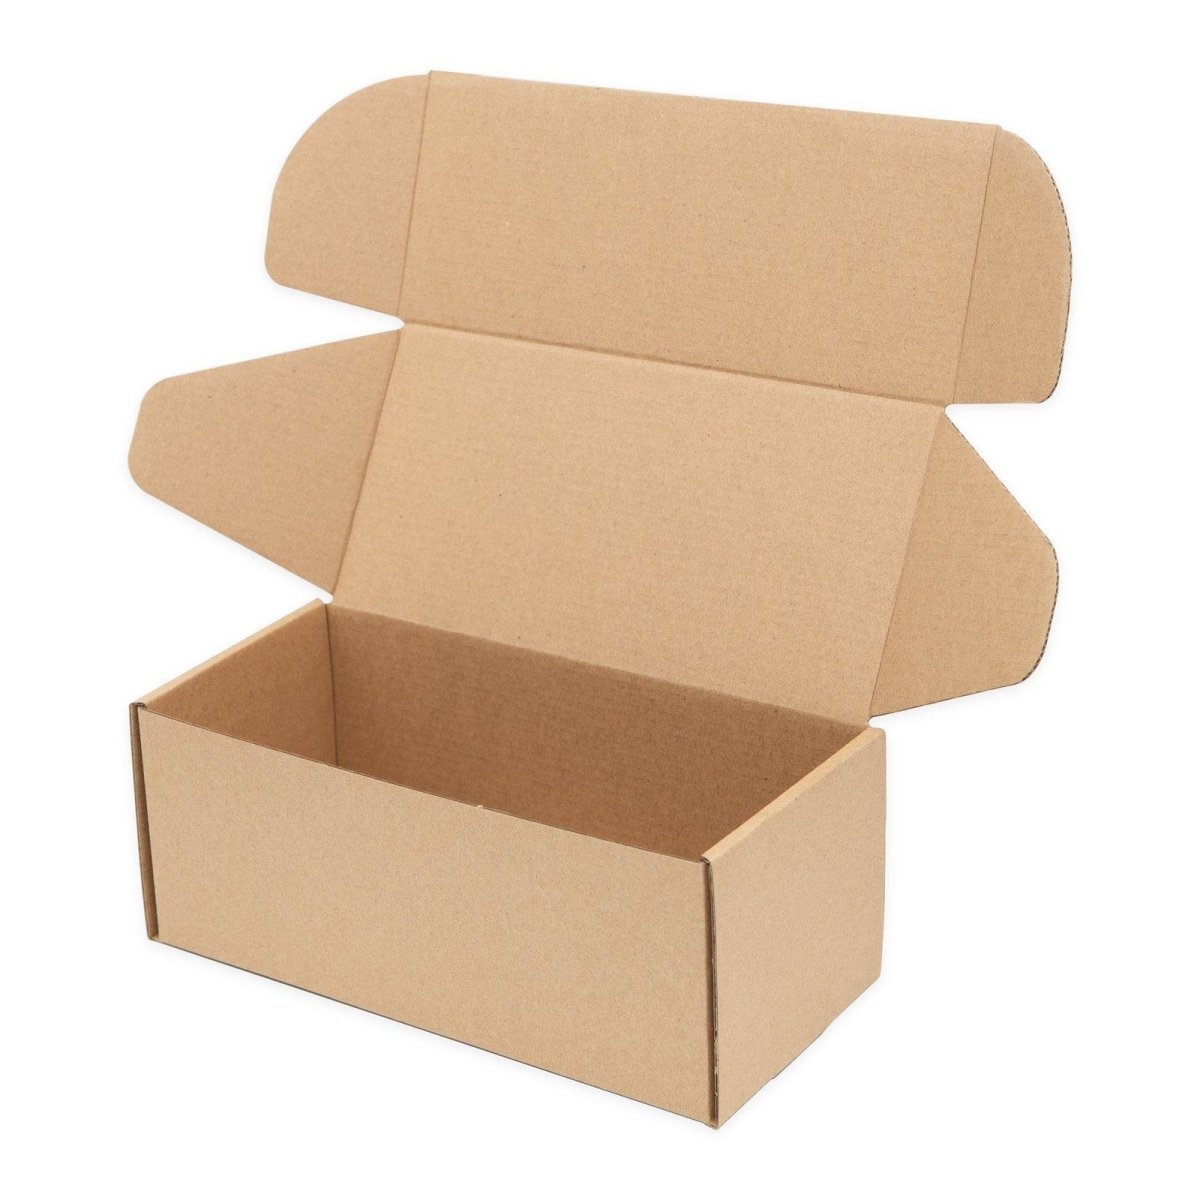 Mailing Box 240 x 110 x 95mm B121 Tuck Front Brown